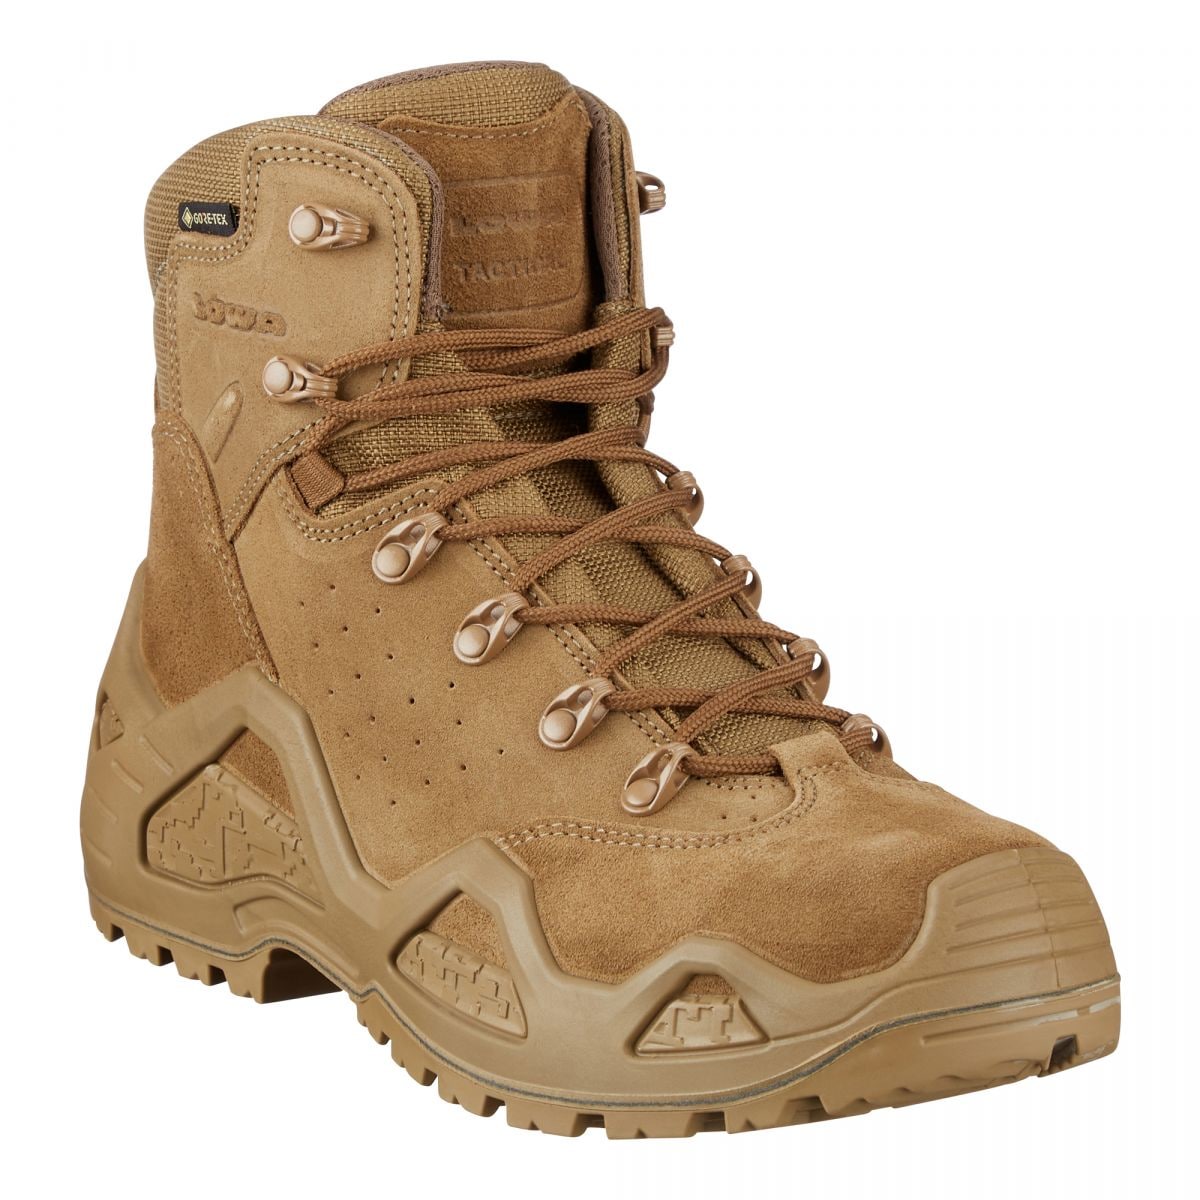 Purchase the LOWA Z-6S GTX® Boot coyote op by ASMC